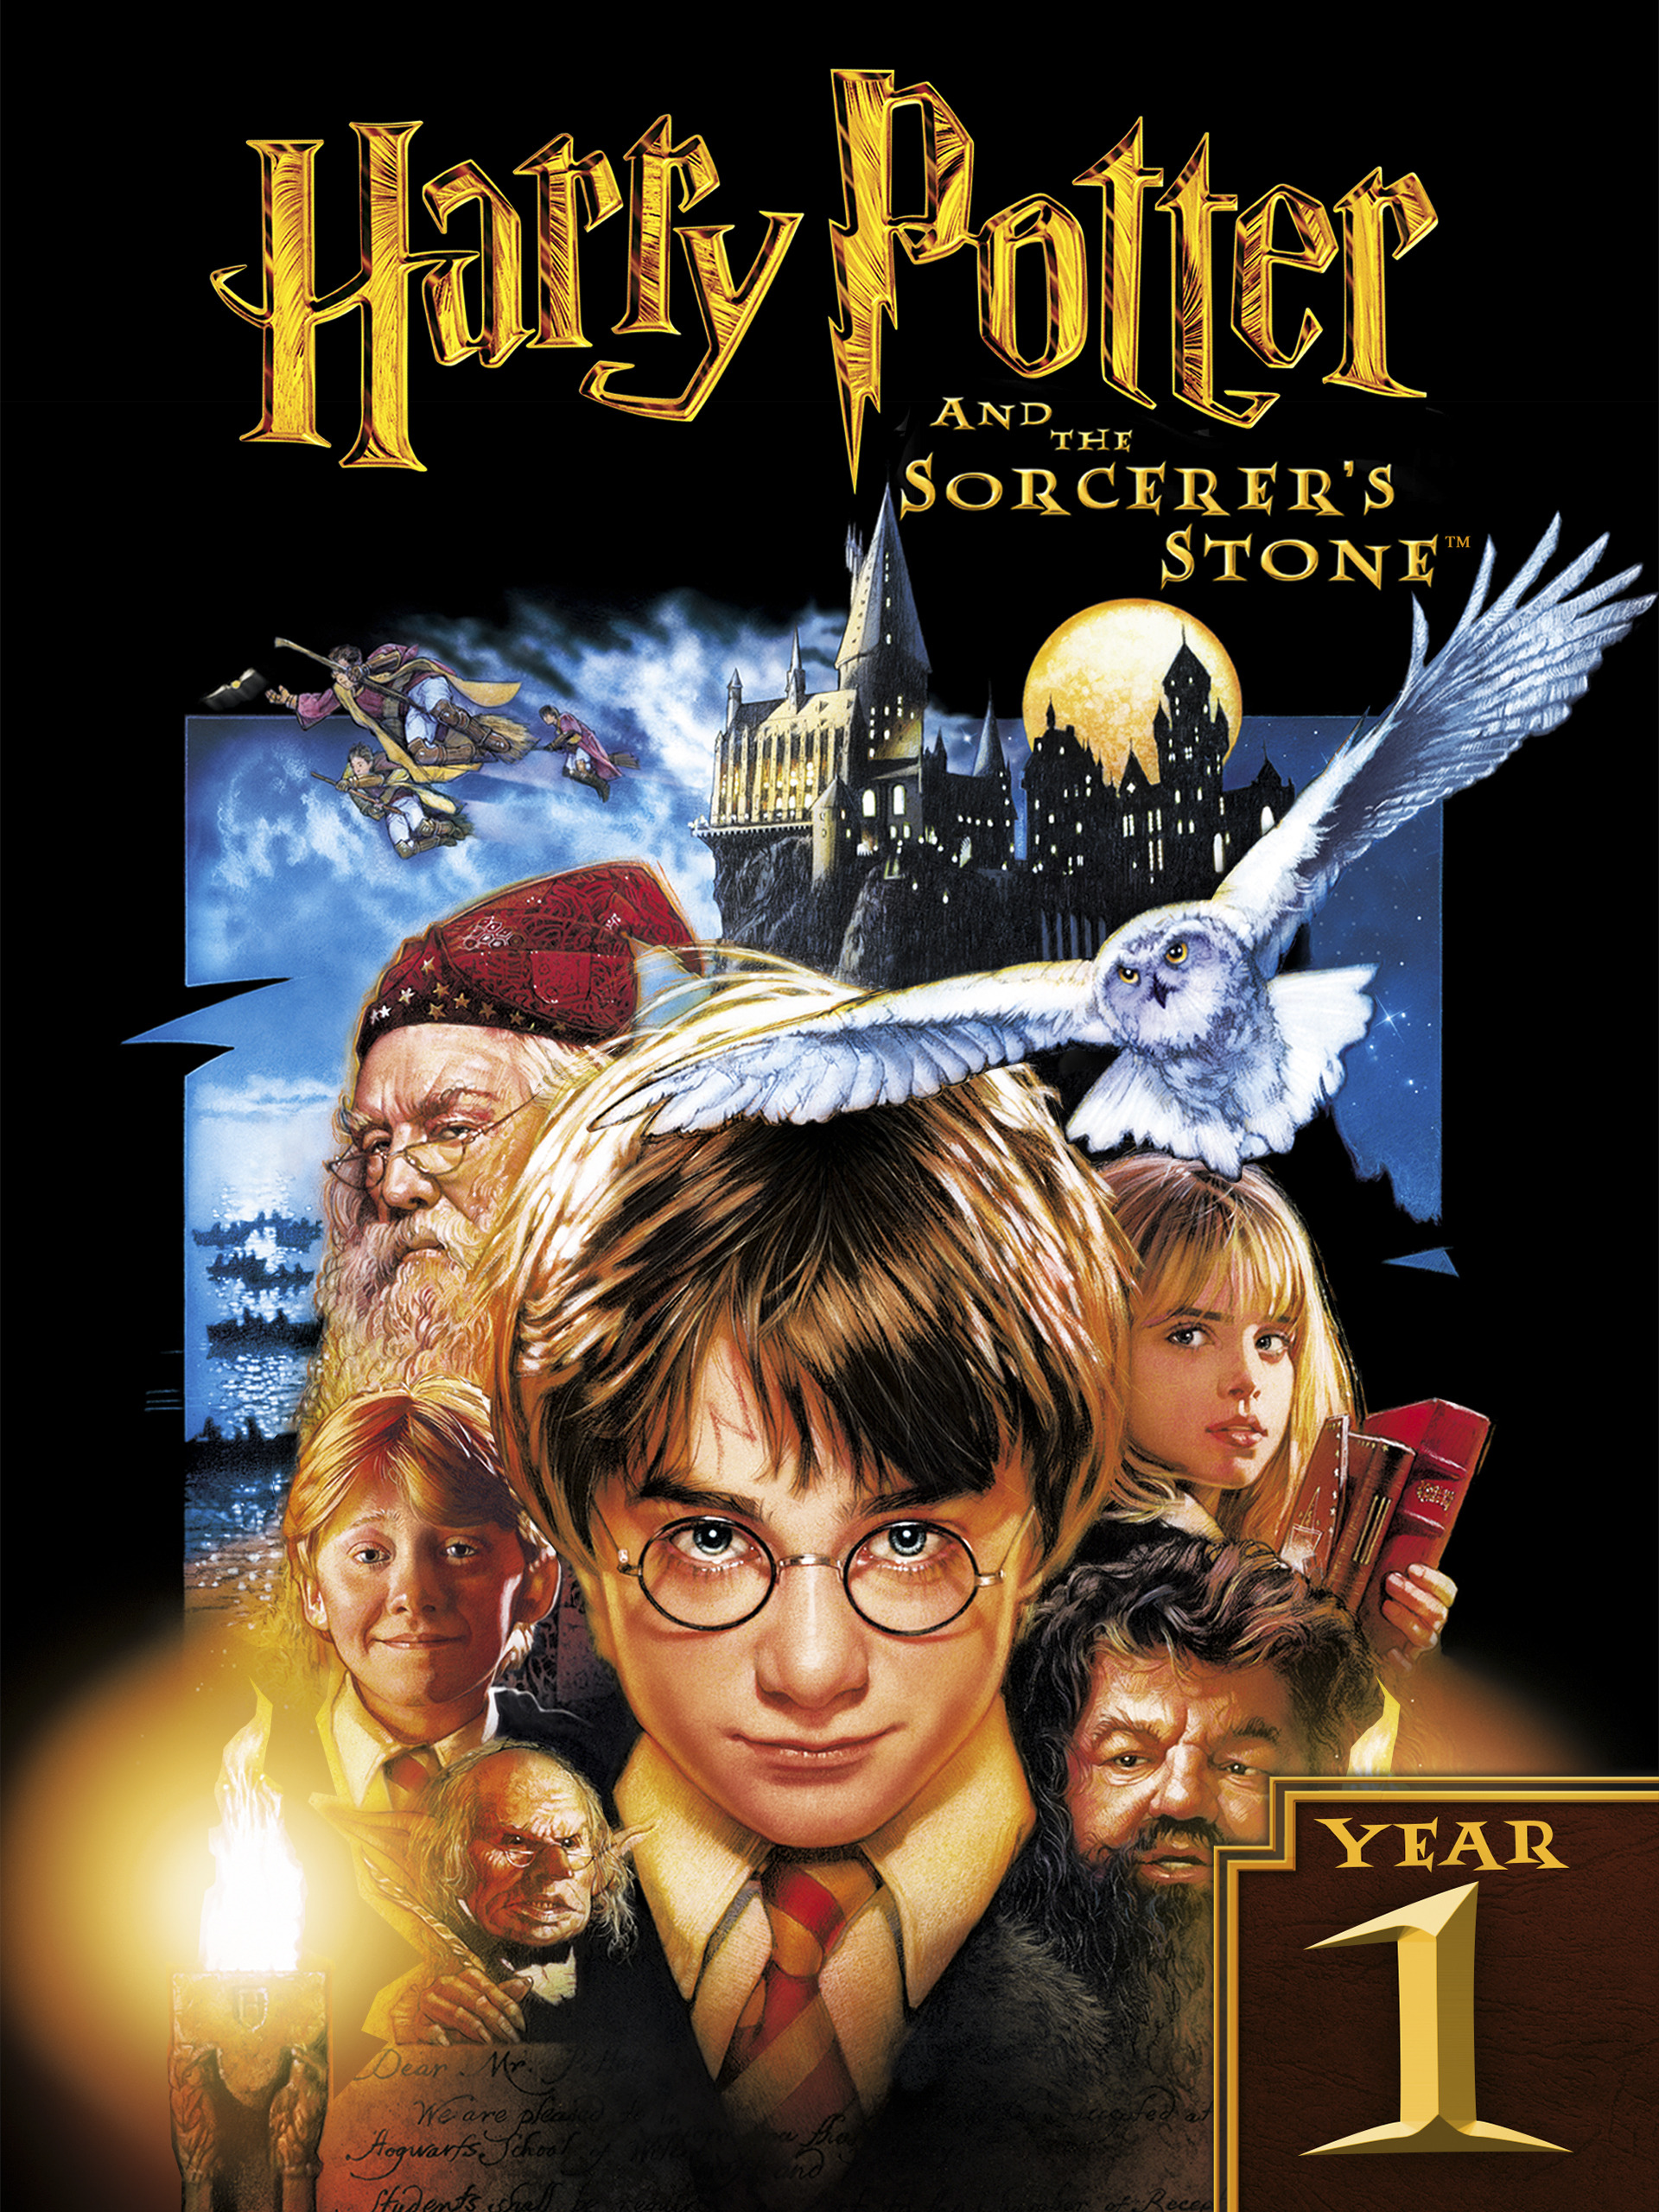 Are the Harry Potter movies available on Prime Video? 2